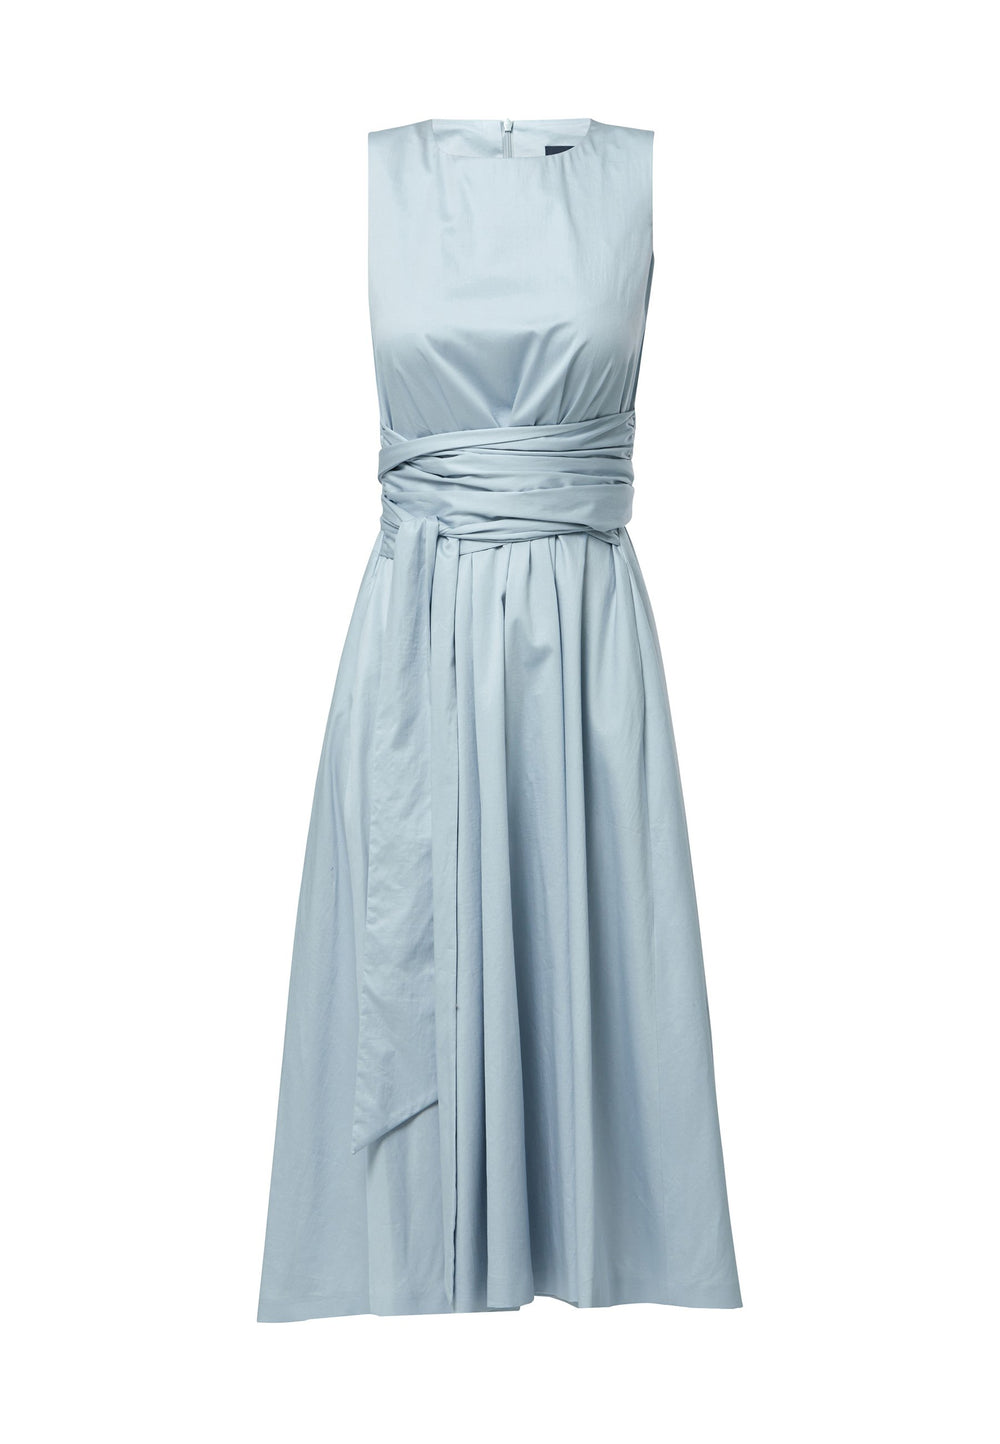 Introducing Avril, a sleeveless dress crafted in luxurious cotton poplin, showcasing a tie waist and charming keyhole back detail. Designed with a flattering empire line silhouette that gracefully skims the body, culminating in a chic mid-calf hemline. Now available in a captivating dusty blue shade, destined to be a standout piece in your wardrobe collection.